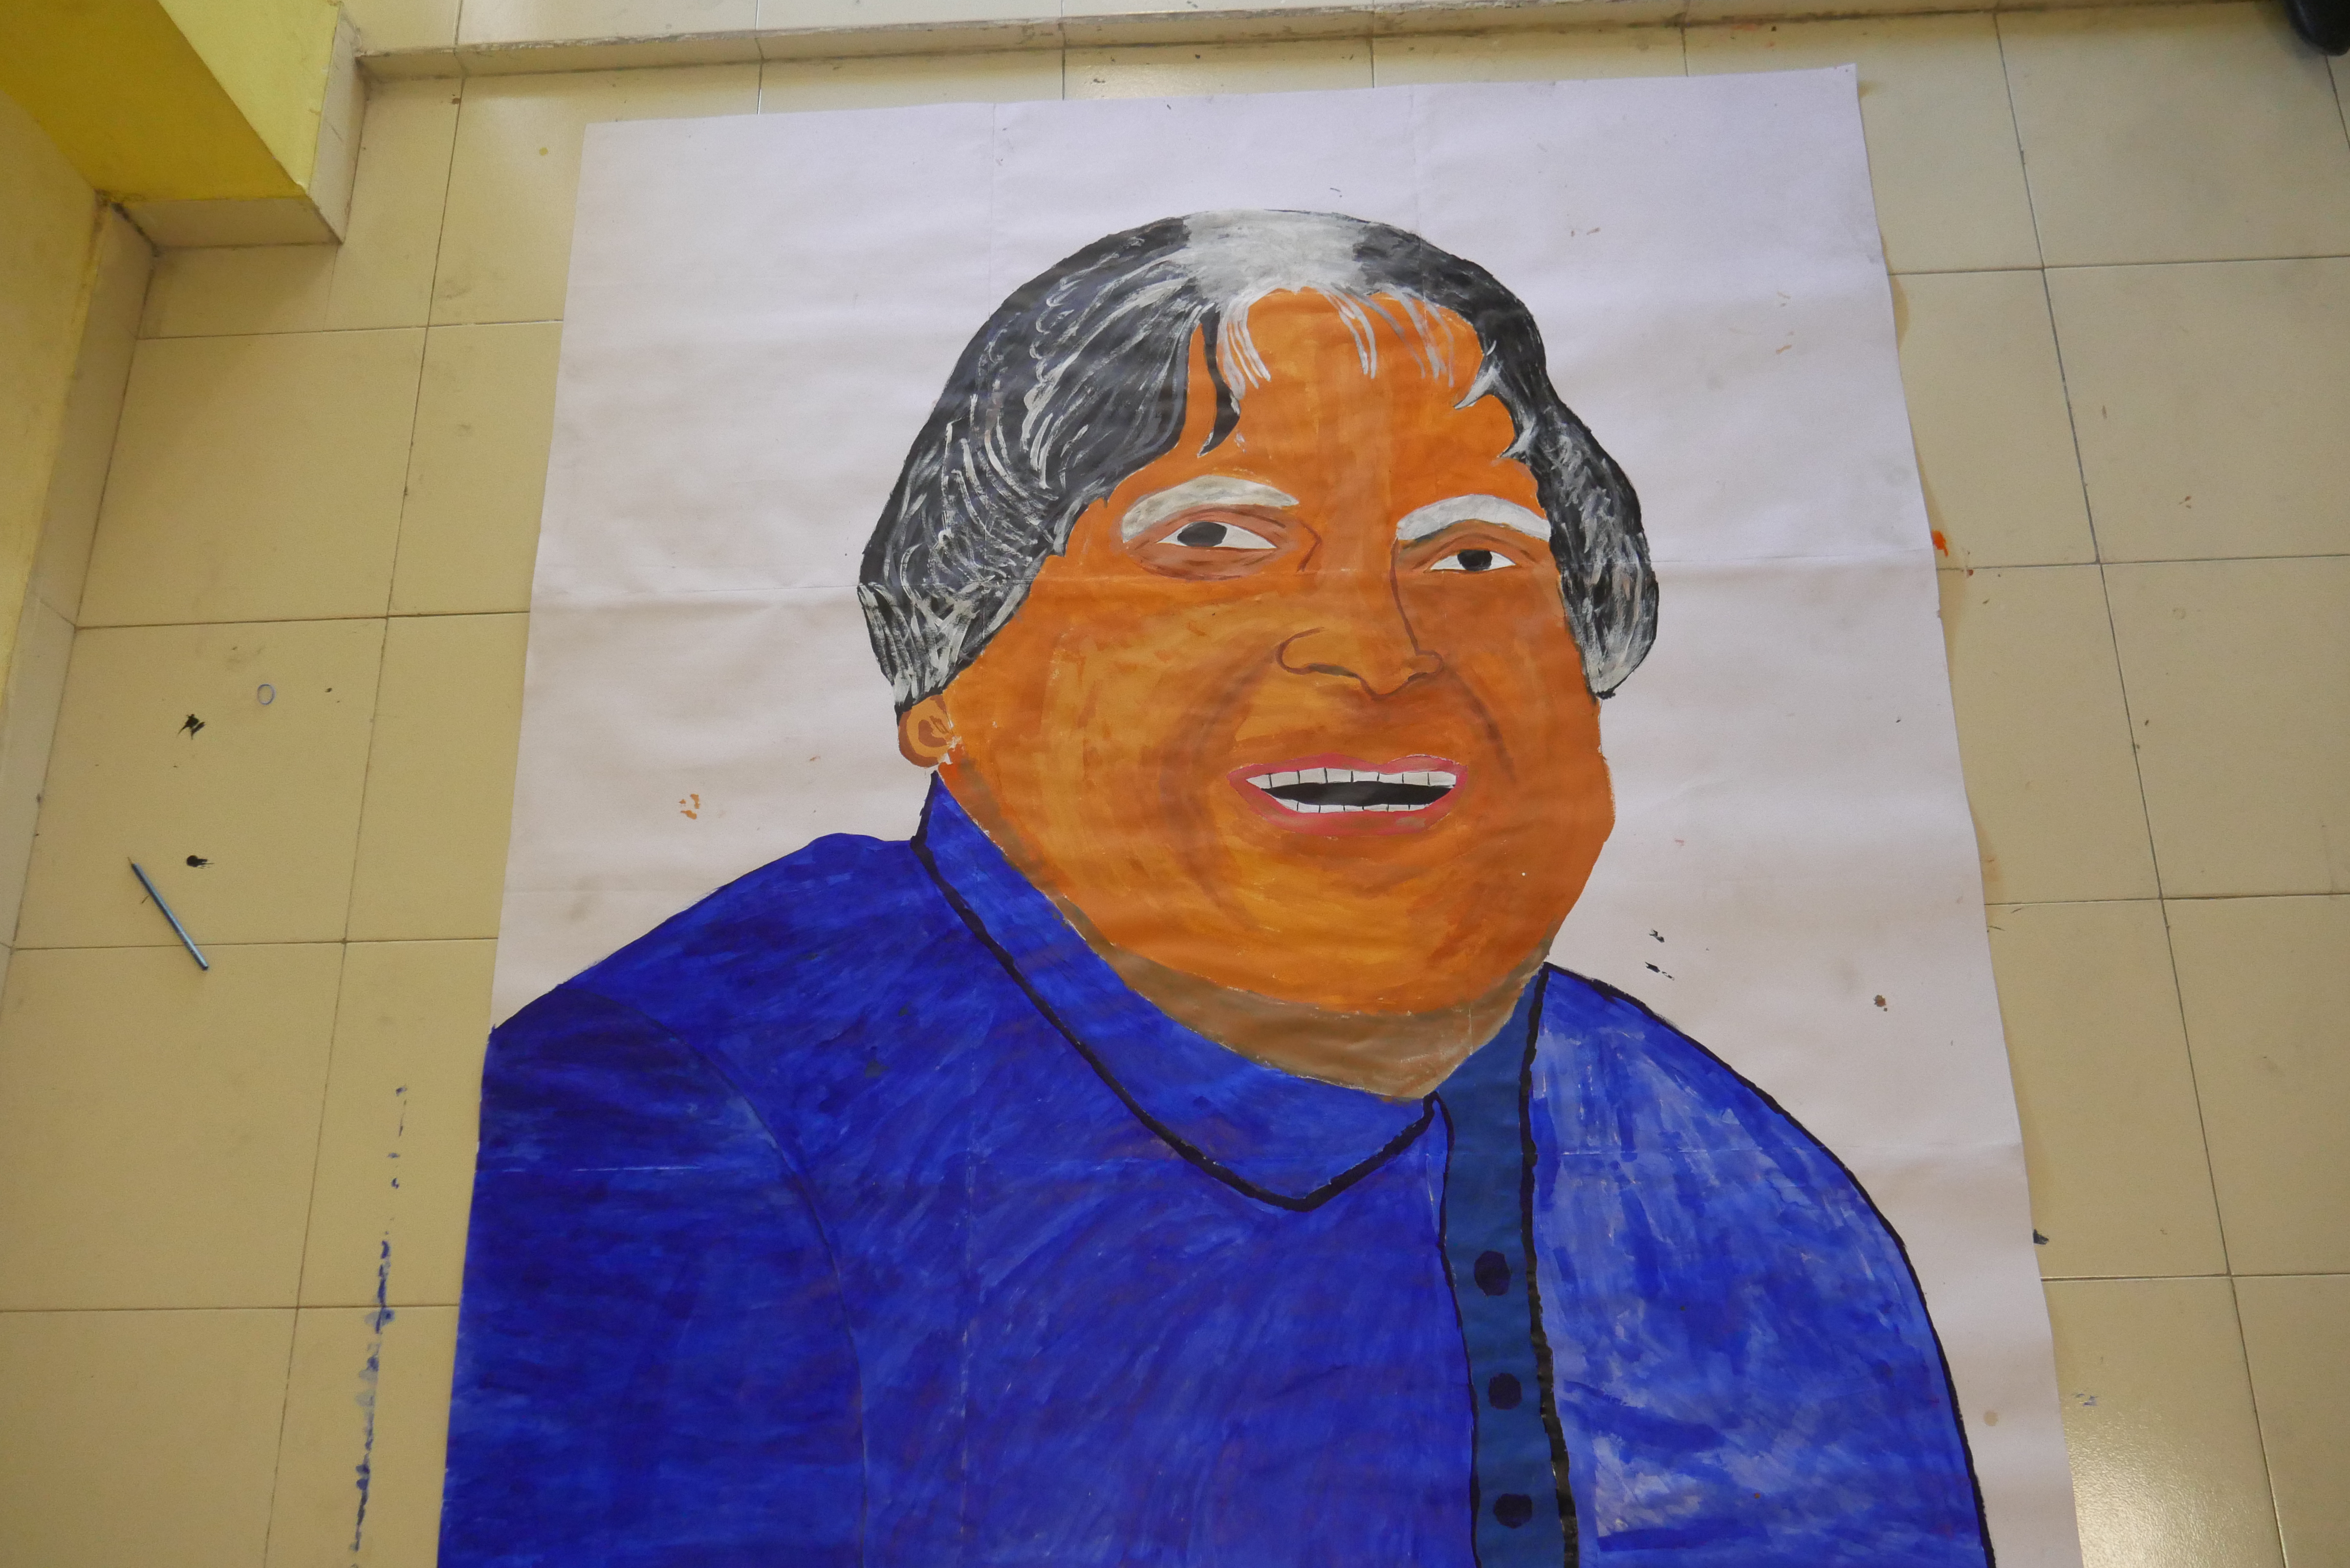 First world record by Tamil Nadu Youth Association and 20 students of  AGM School by making a collage, rangoli, and painting portrait in 60 minutes,  to honoUr the memory of Former Indian president dr.A.P.J.Abdul Kalam.